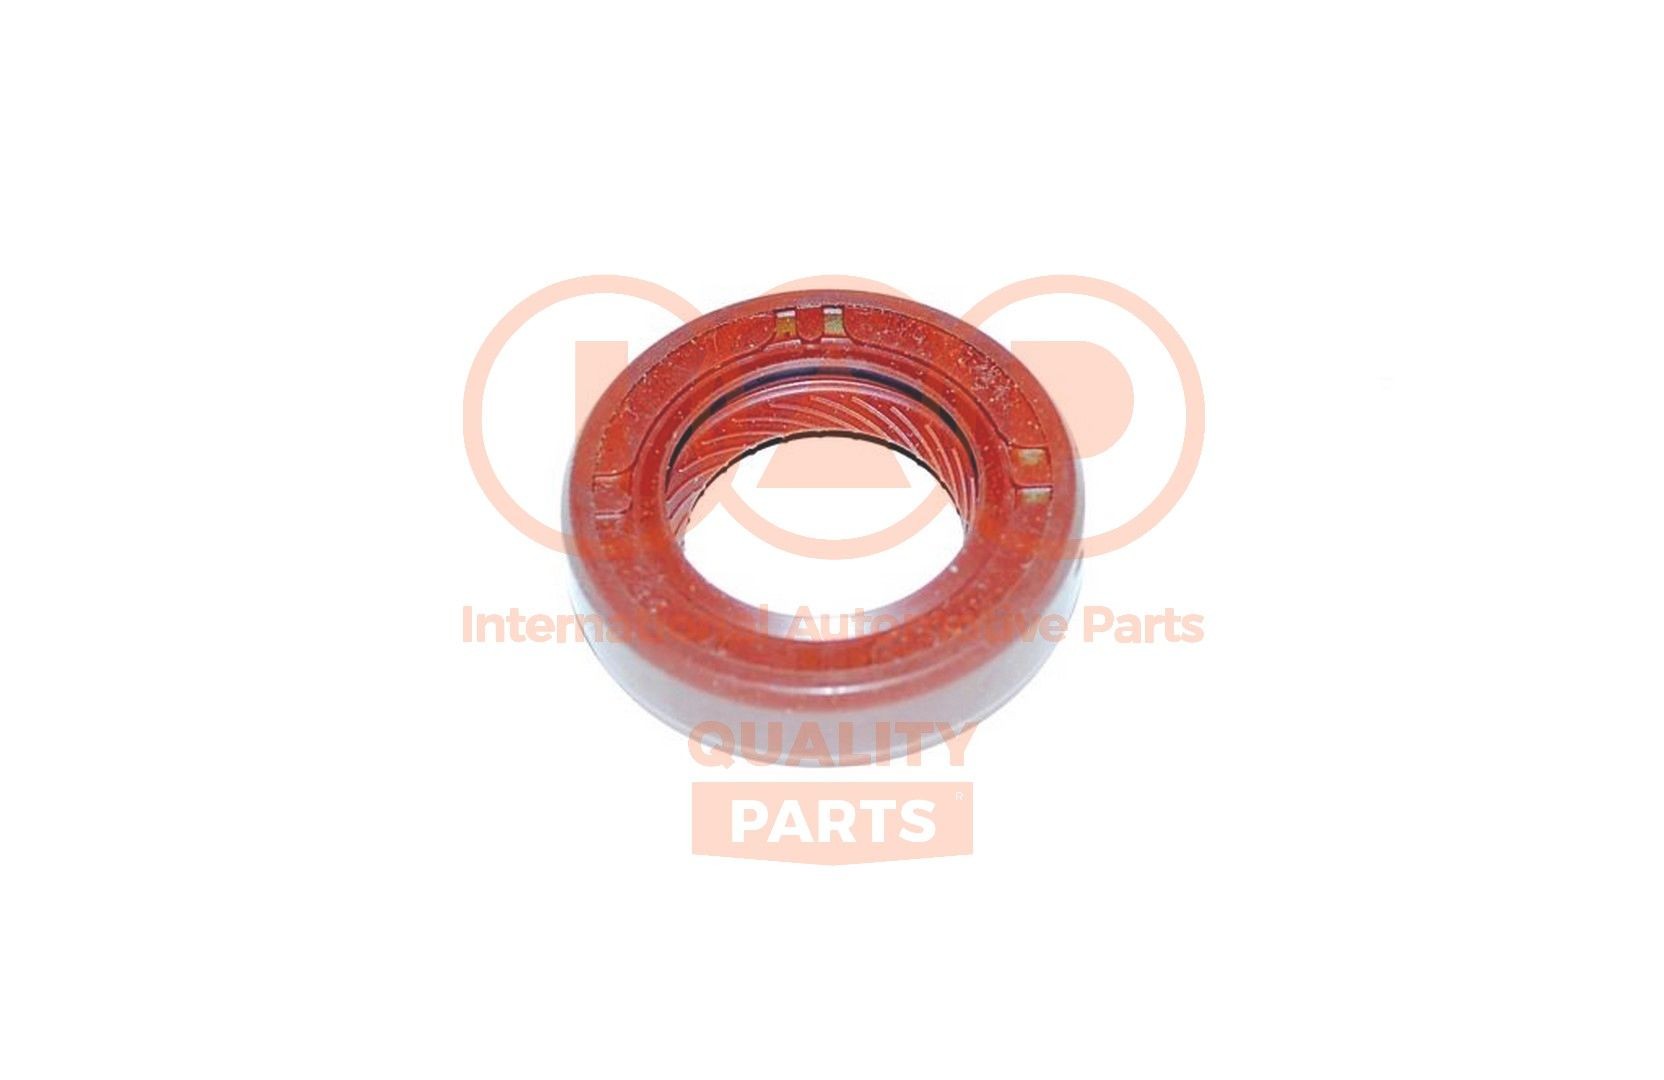 IAP QUALITY PARTS 136-12011 Seal Ring MD069948